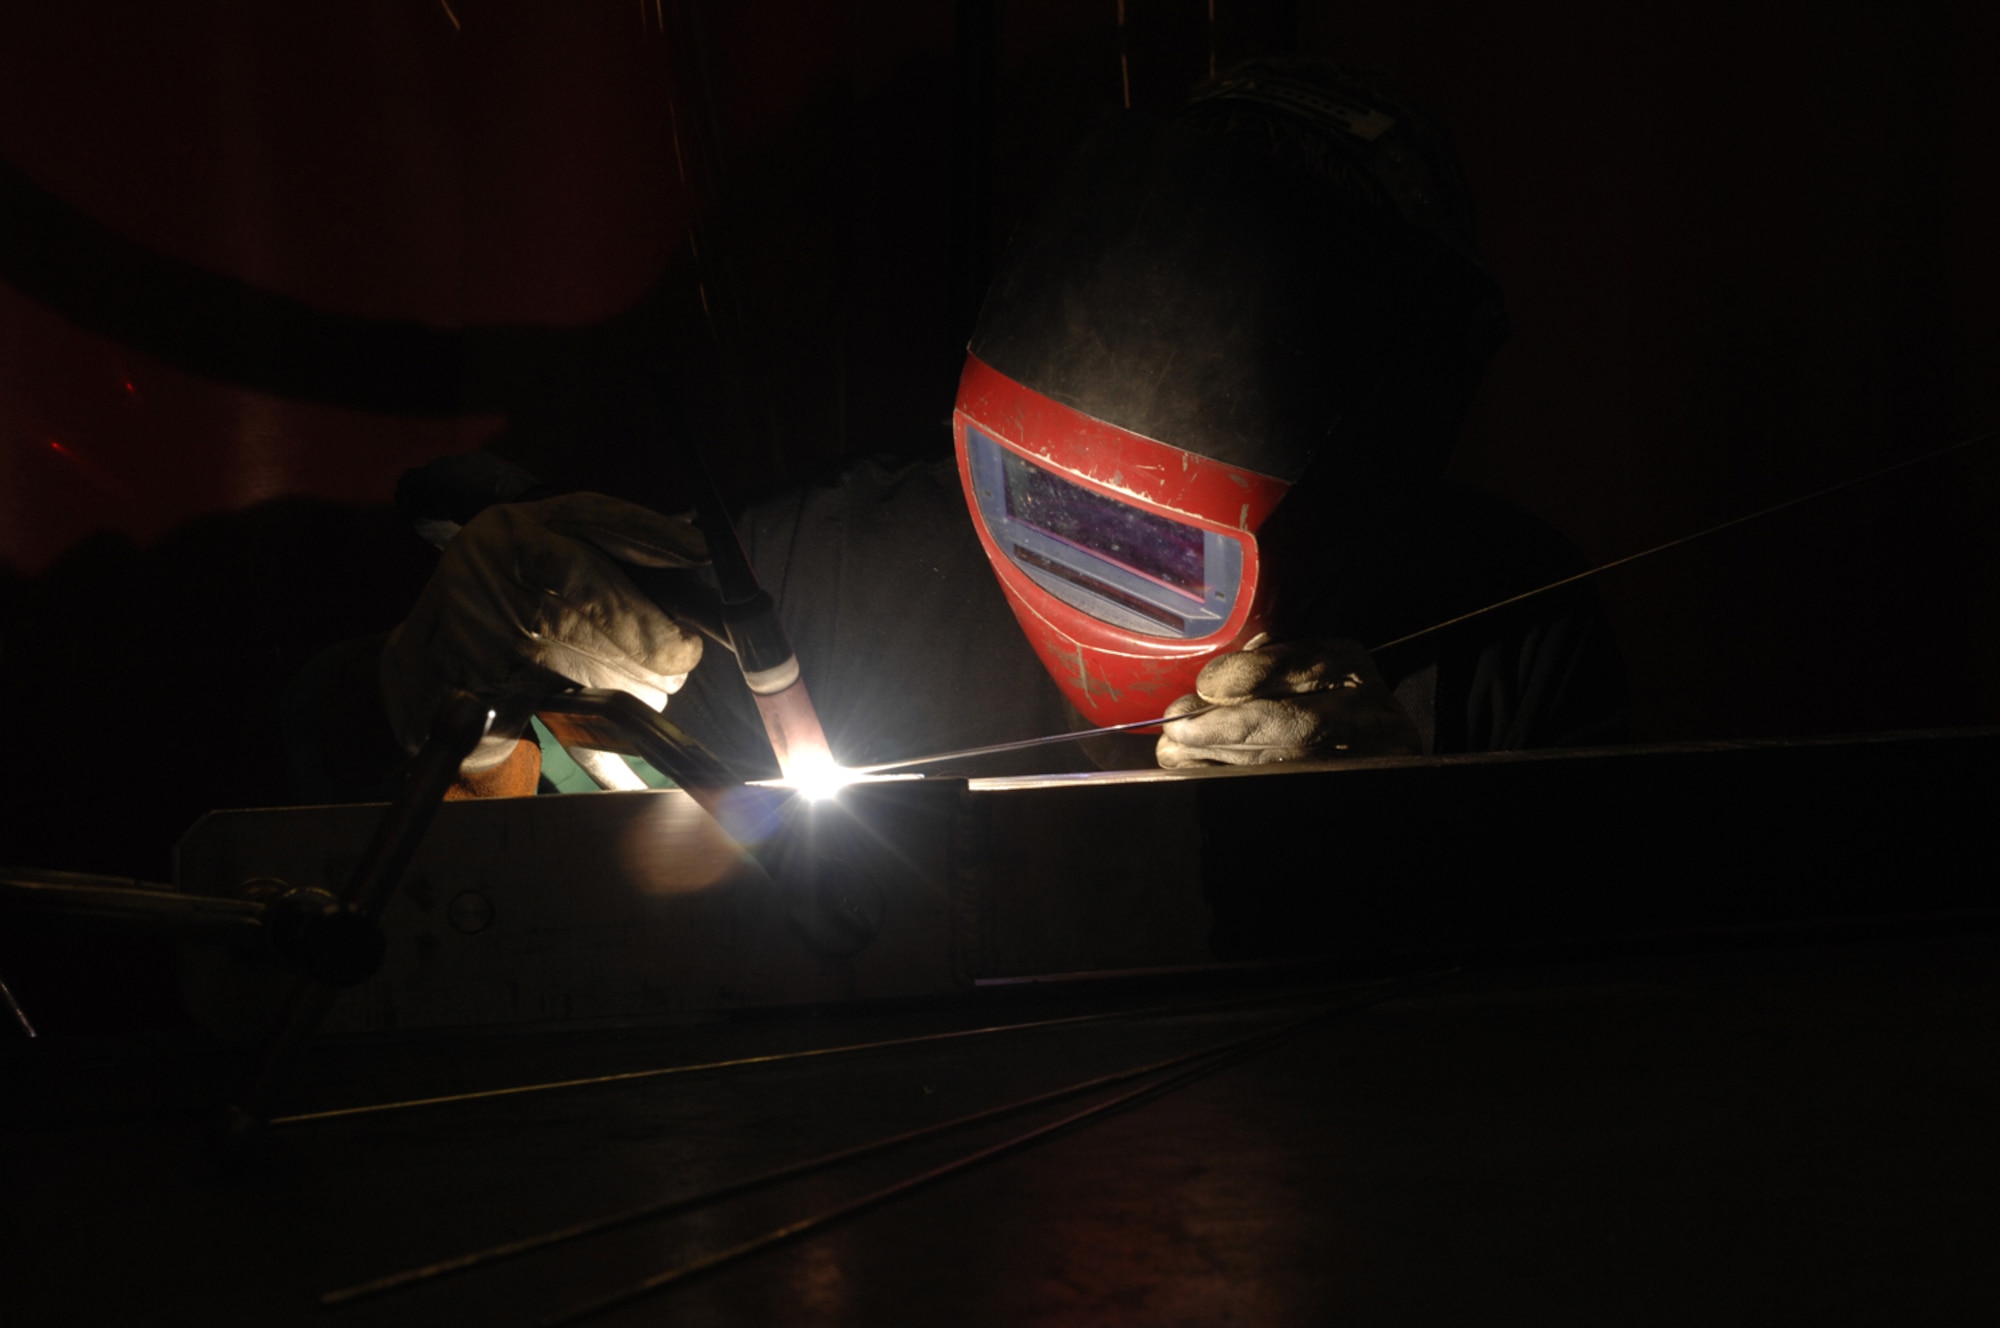 Senior Airman Daniel Tomlin, 48th Equipment Maintenance Squadron, welds on an aircraft tow bar used to taxi aircraft on the runway. Airman Tomlin is part of the metals technology shop, which is responsible for welding and machine maintenance for the F-15s. (Air Force photo by Airman 1st Class Jessica Snow)
